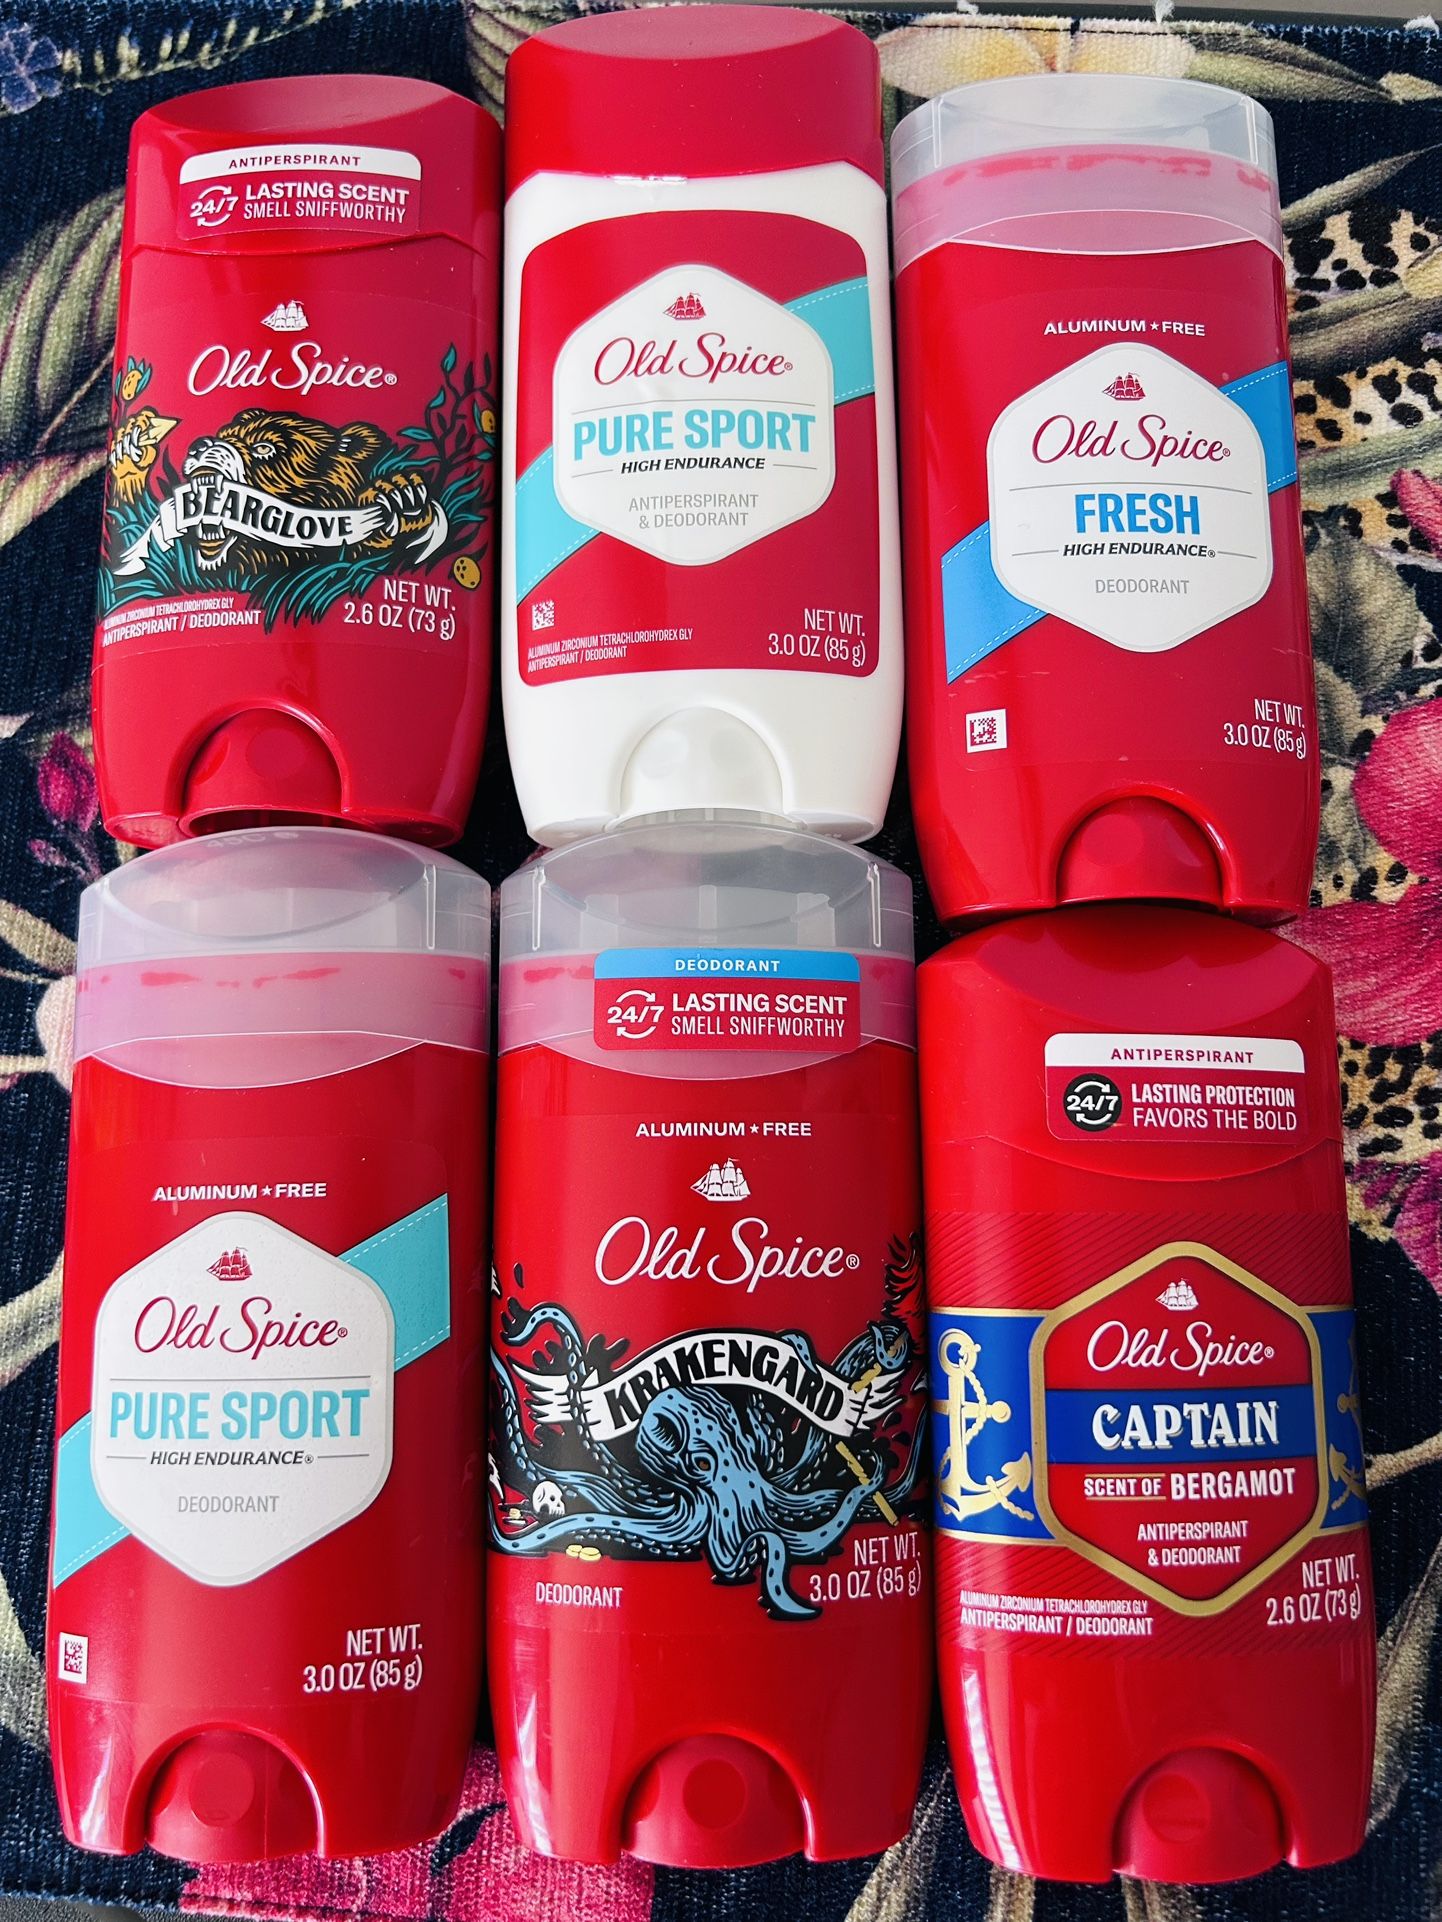 Old Spice Deodorant Stick- $4 Each